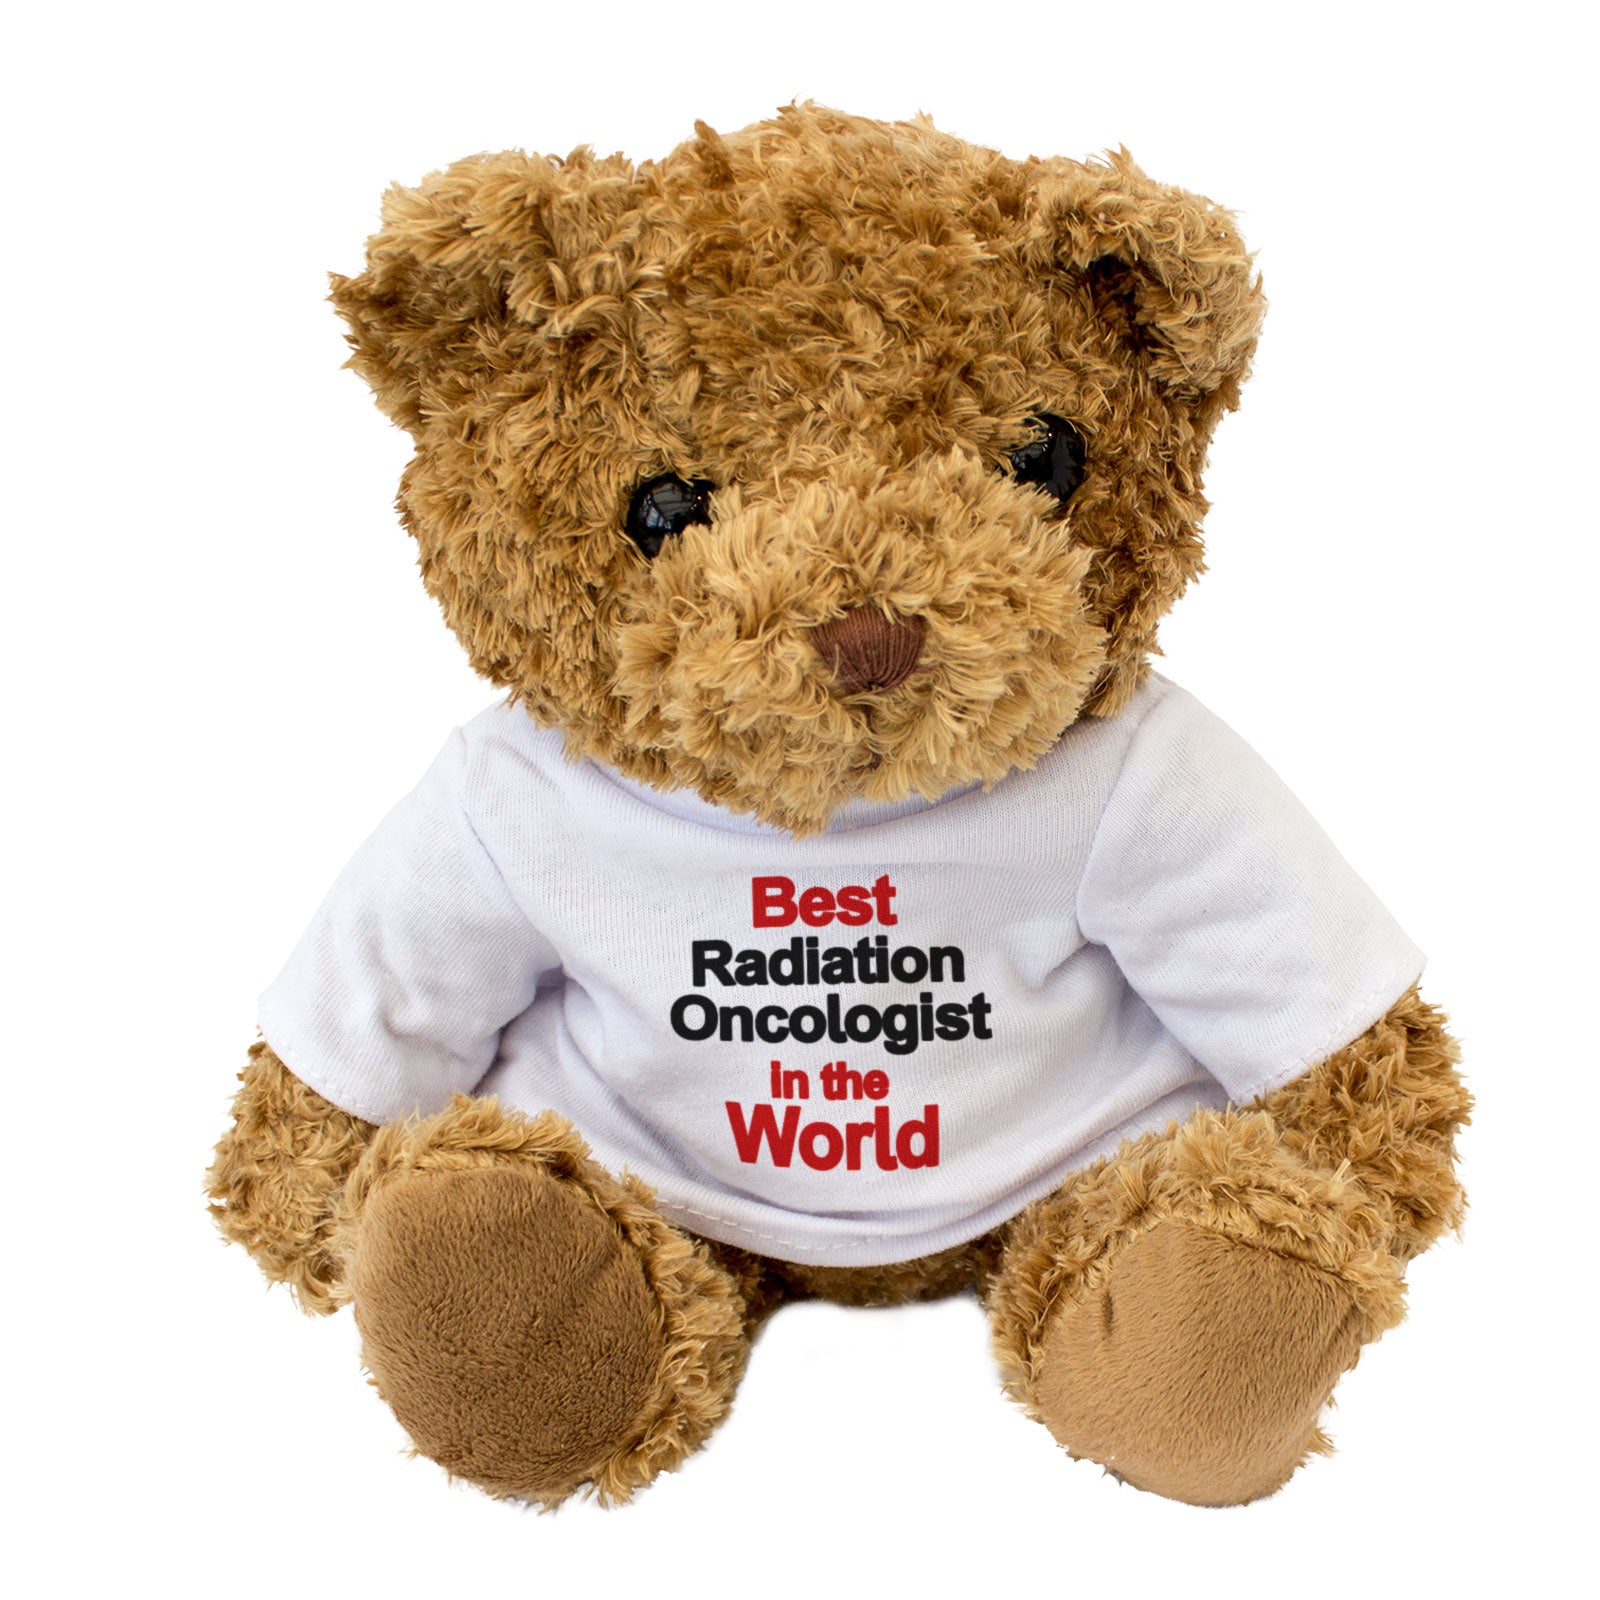 Best Radiation Oncologist In The World Teddy Bear